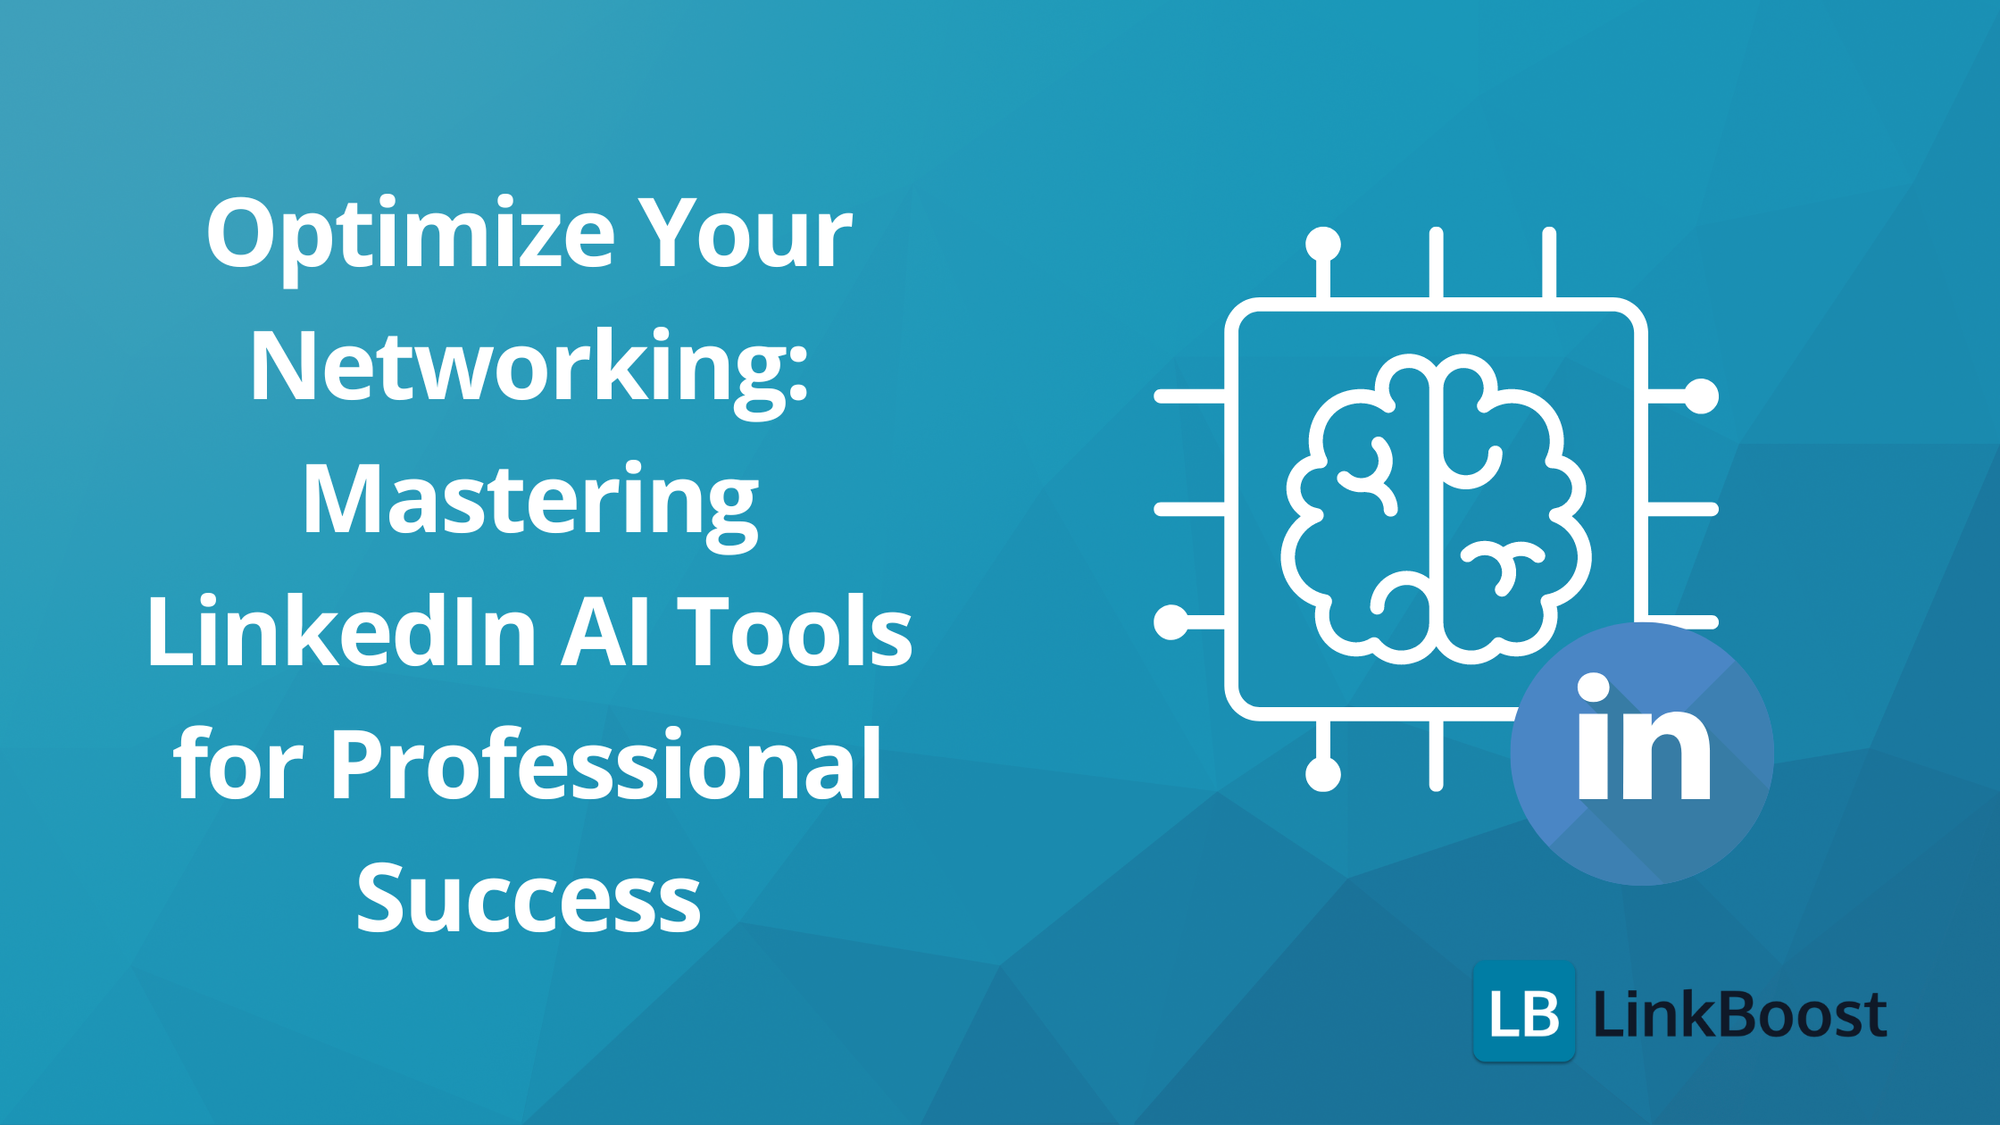 Optimize Your Networking: Mastering LinkedIn AI Tools for Professional Success